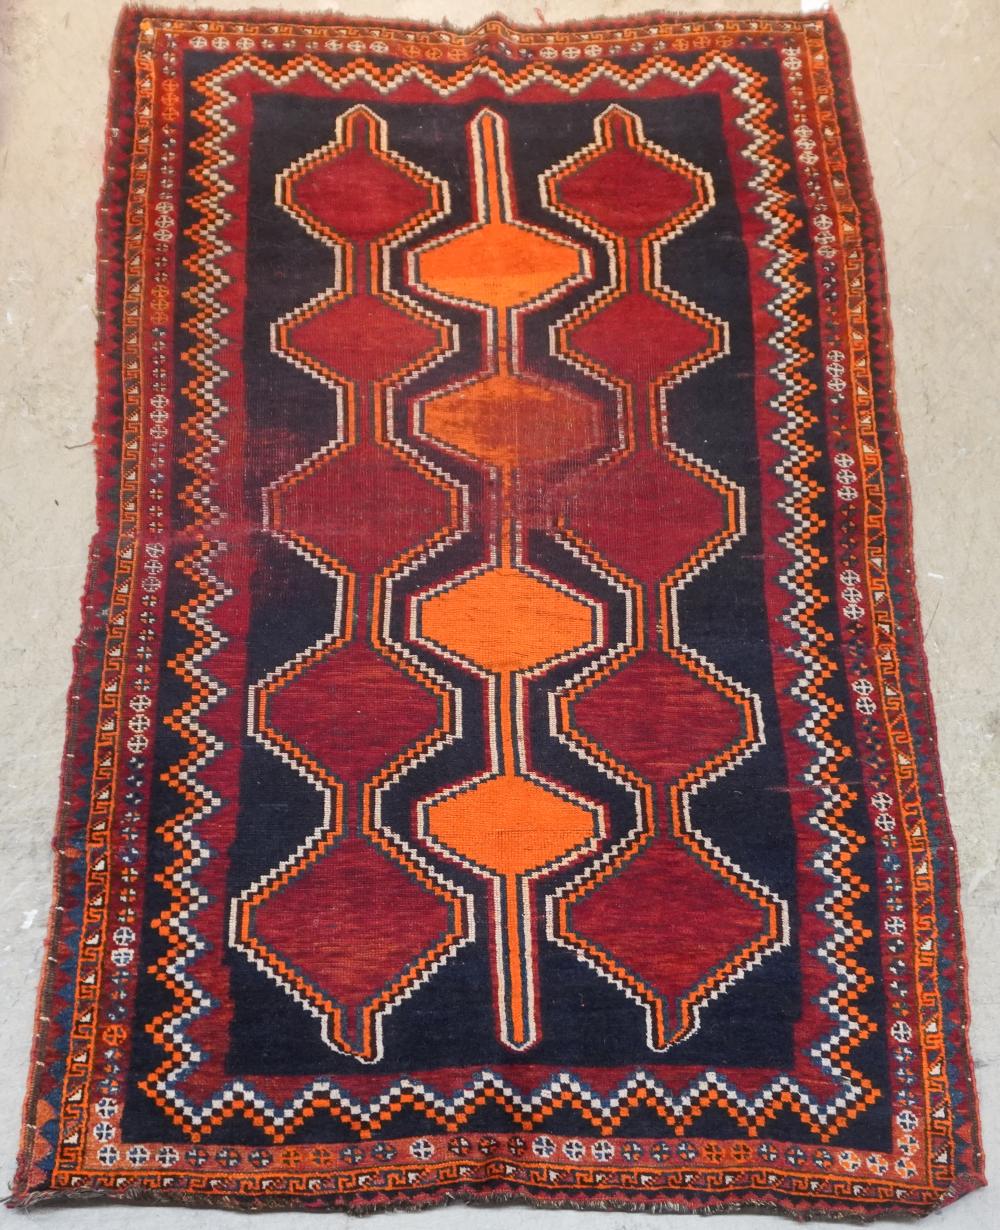 PERSIAN RUG 7 FT 4 IN X 4 FT 1 2e7d59